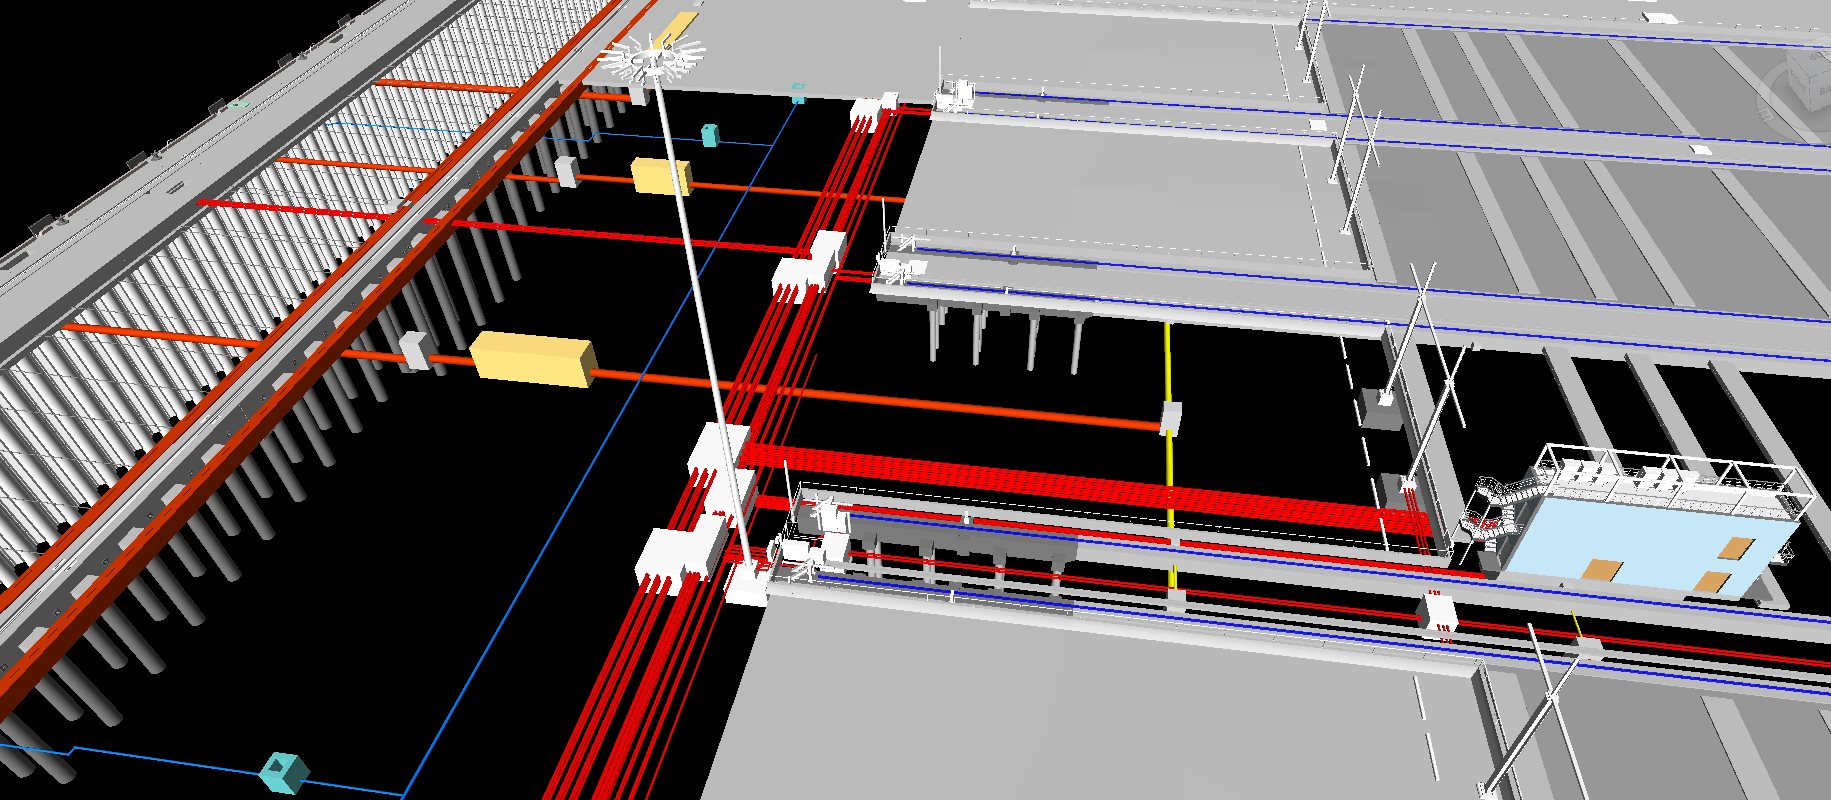 BIM image of the Caribbean container port yard & quay with services coordination